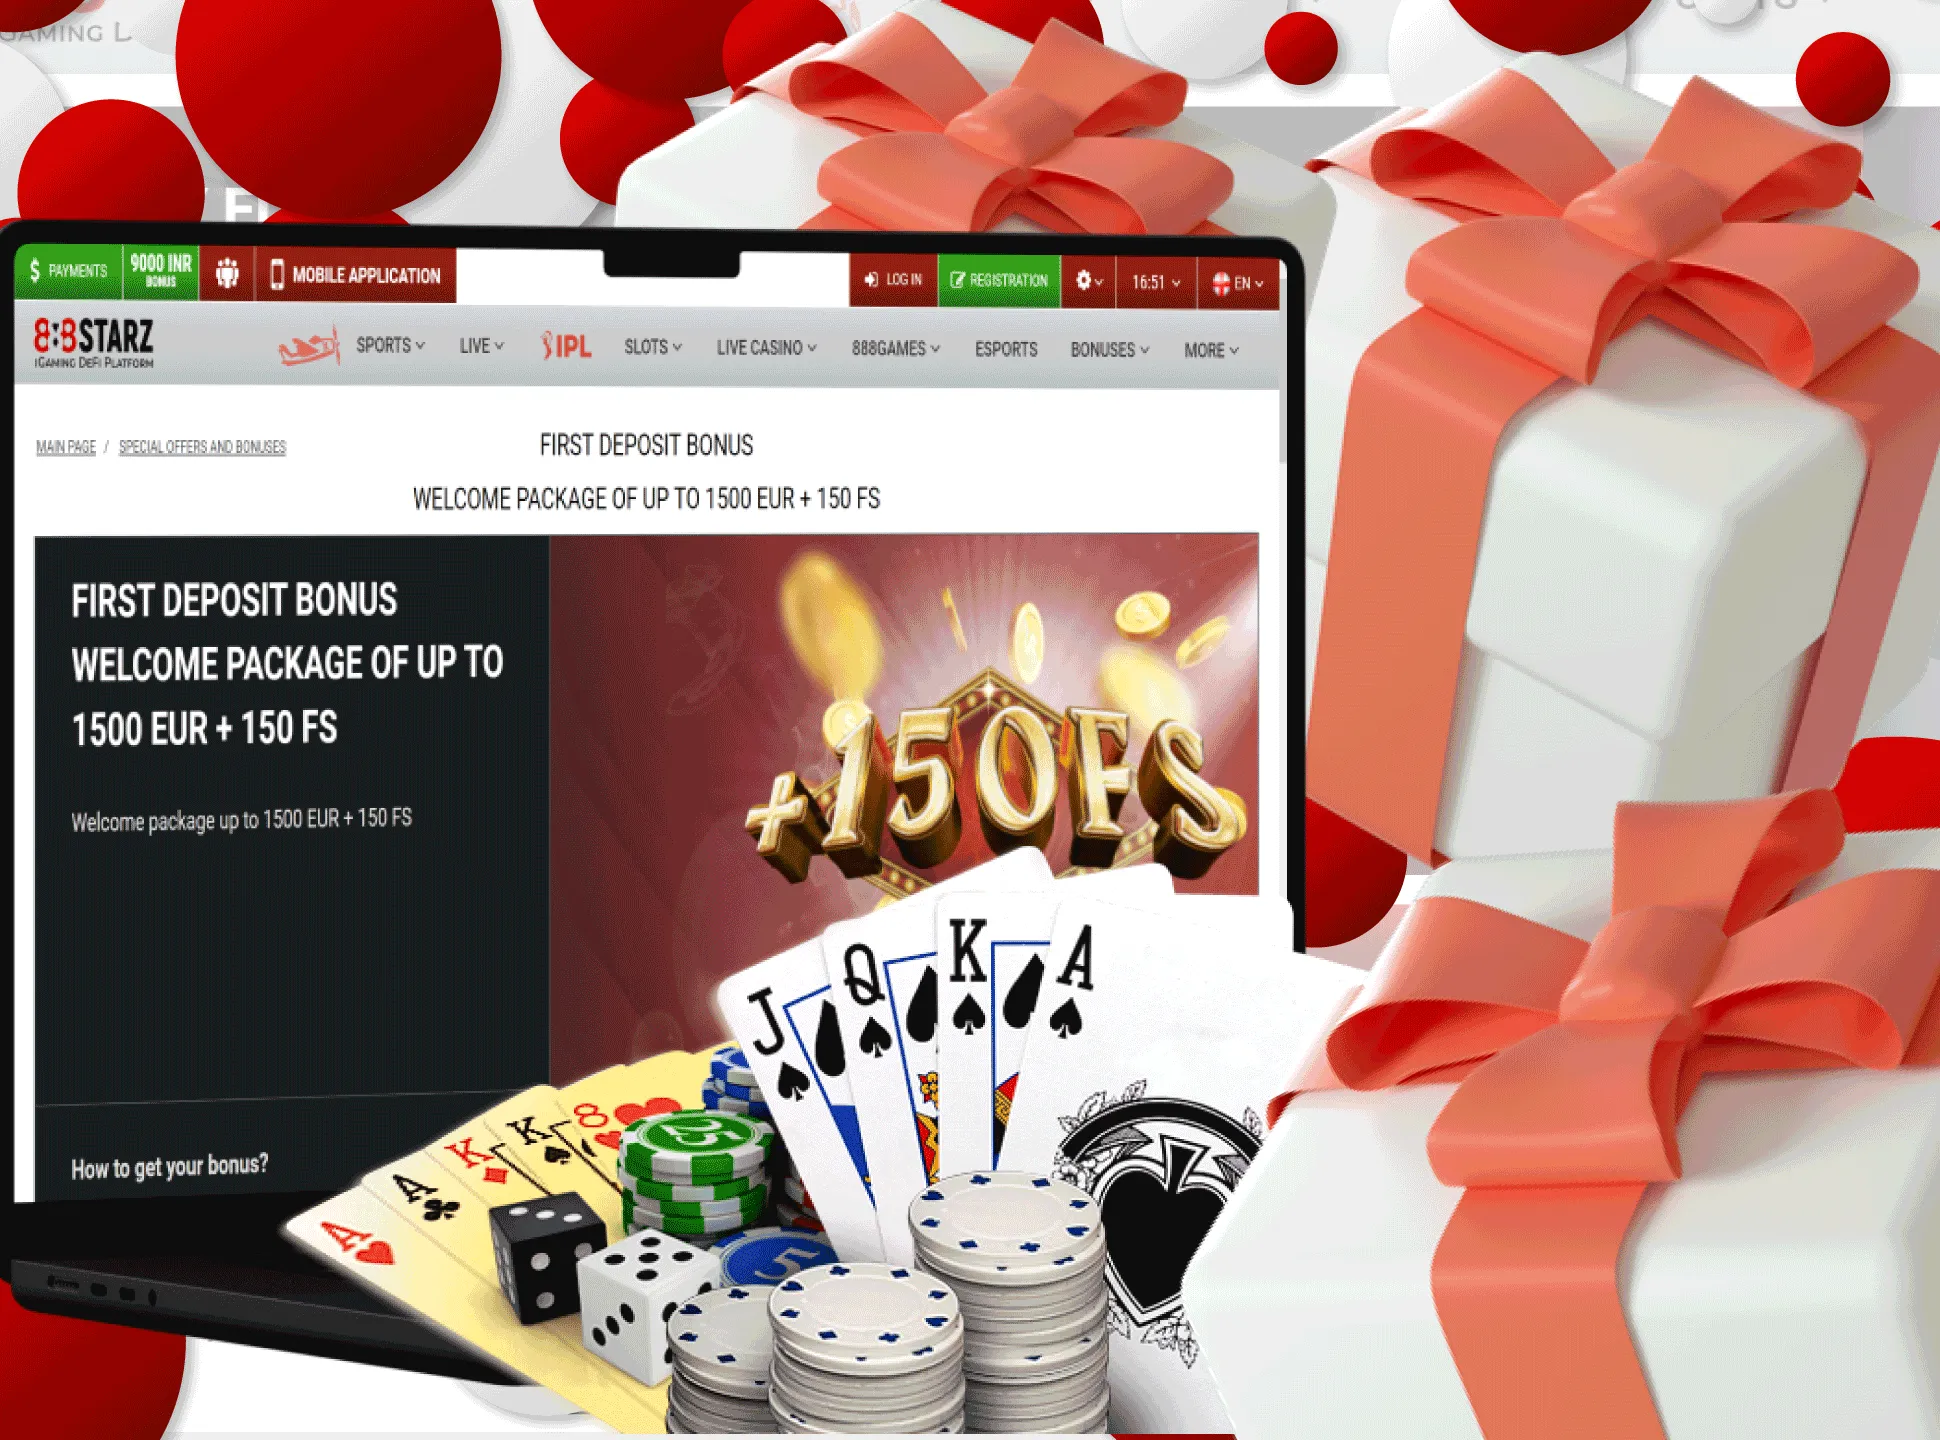 Get a welcome bonus and 150 free spins on the casino games.